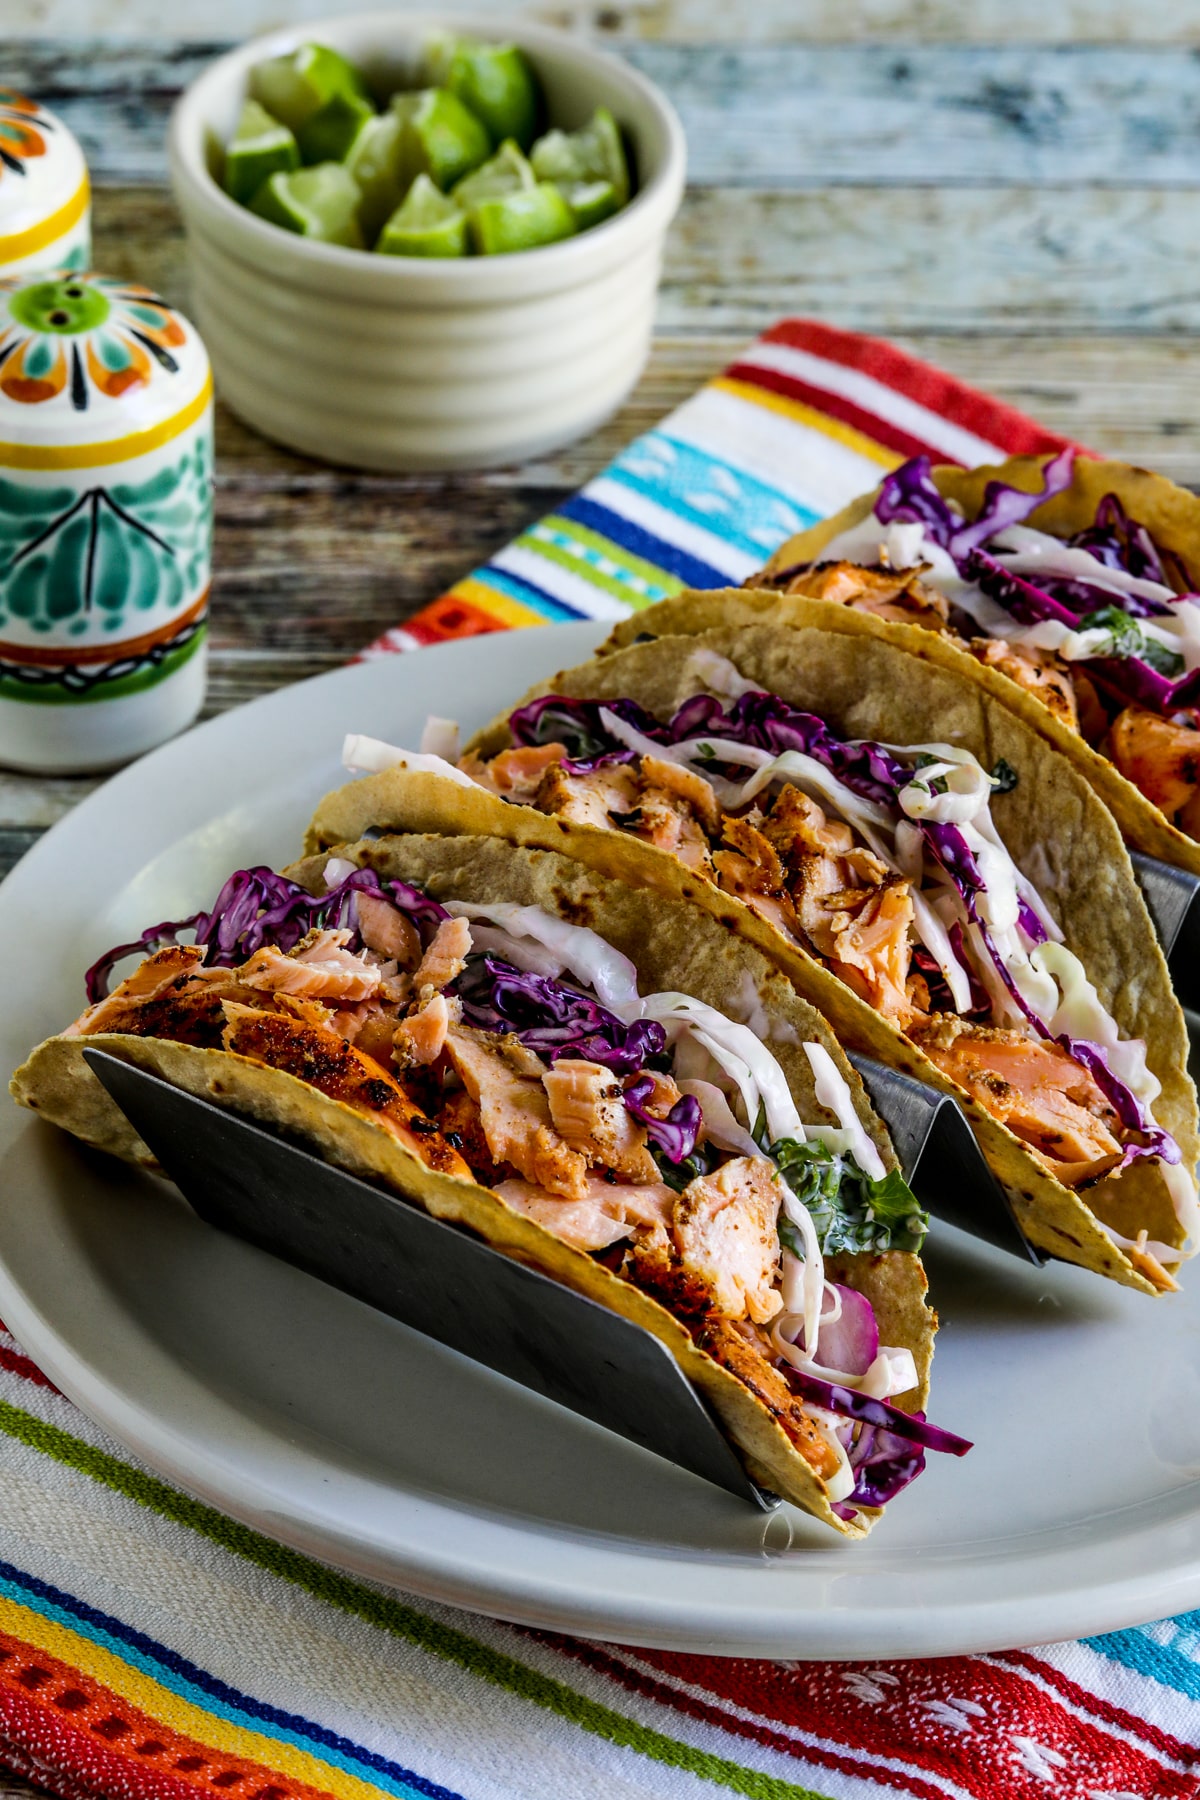 Salmon taco with Mexican slaw in a taco stand on the plate